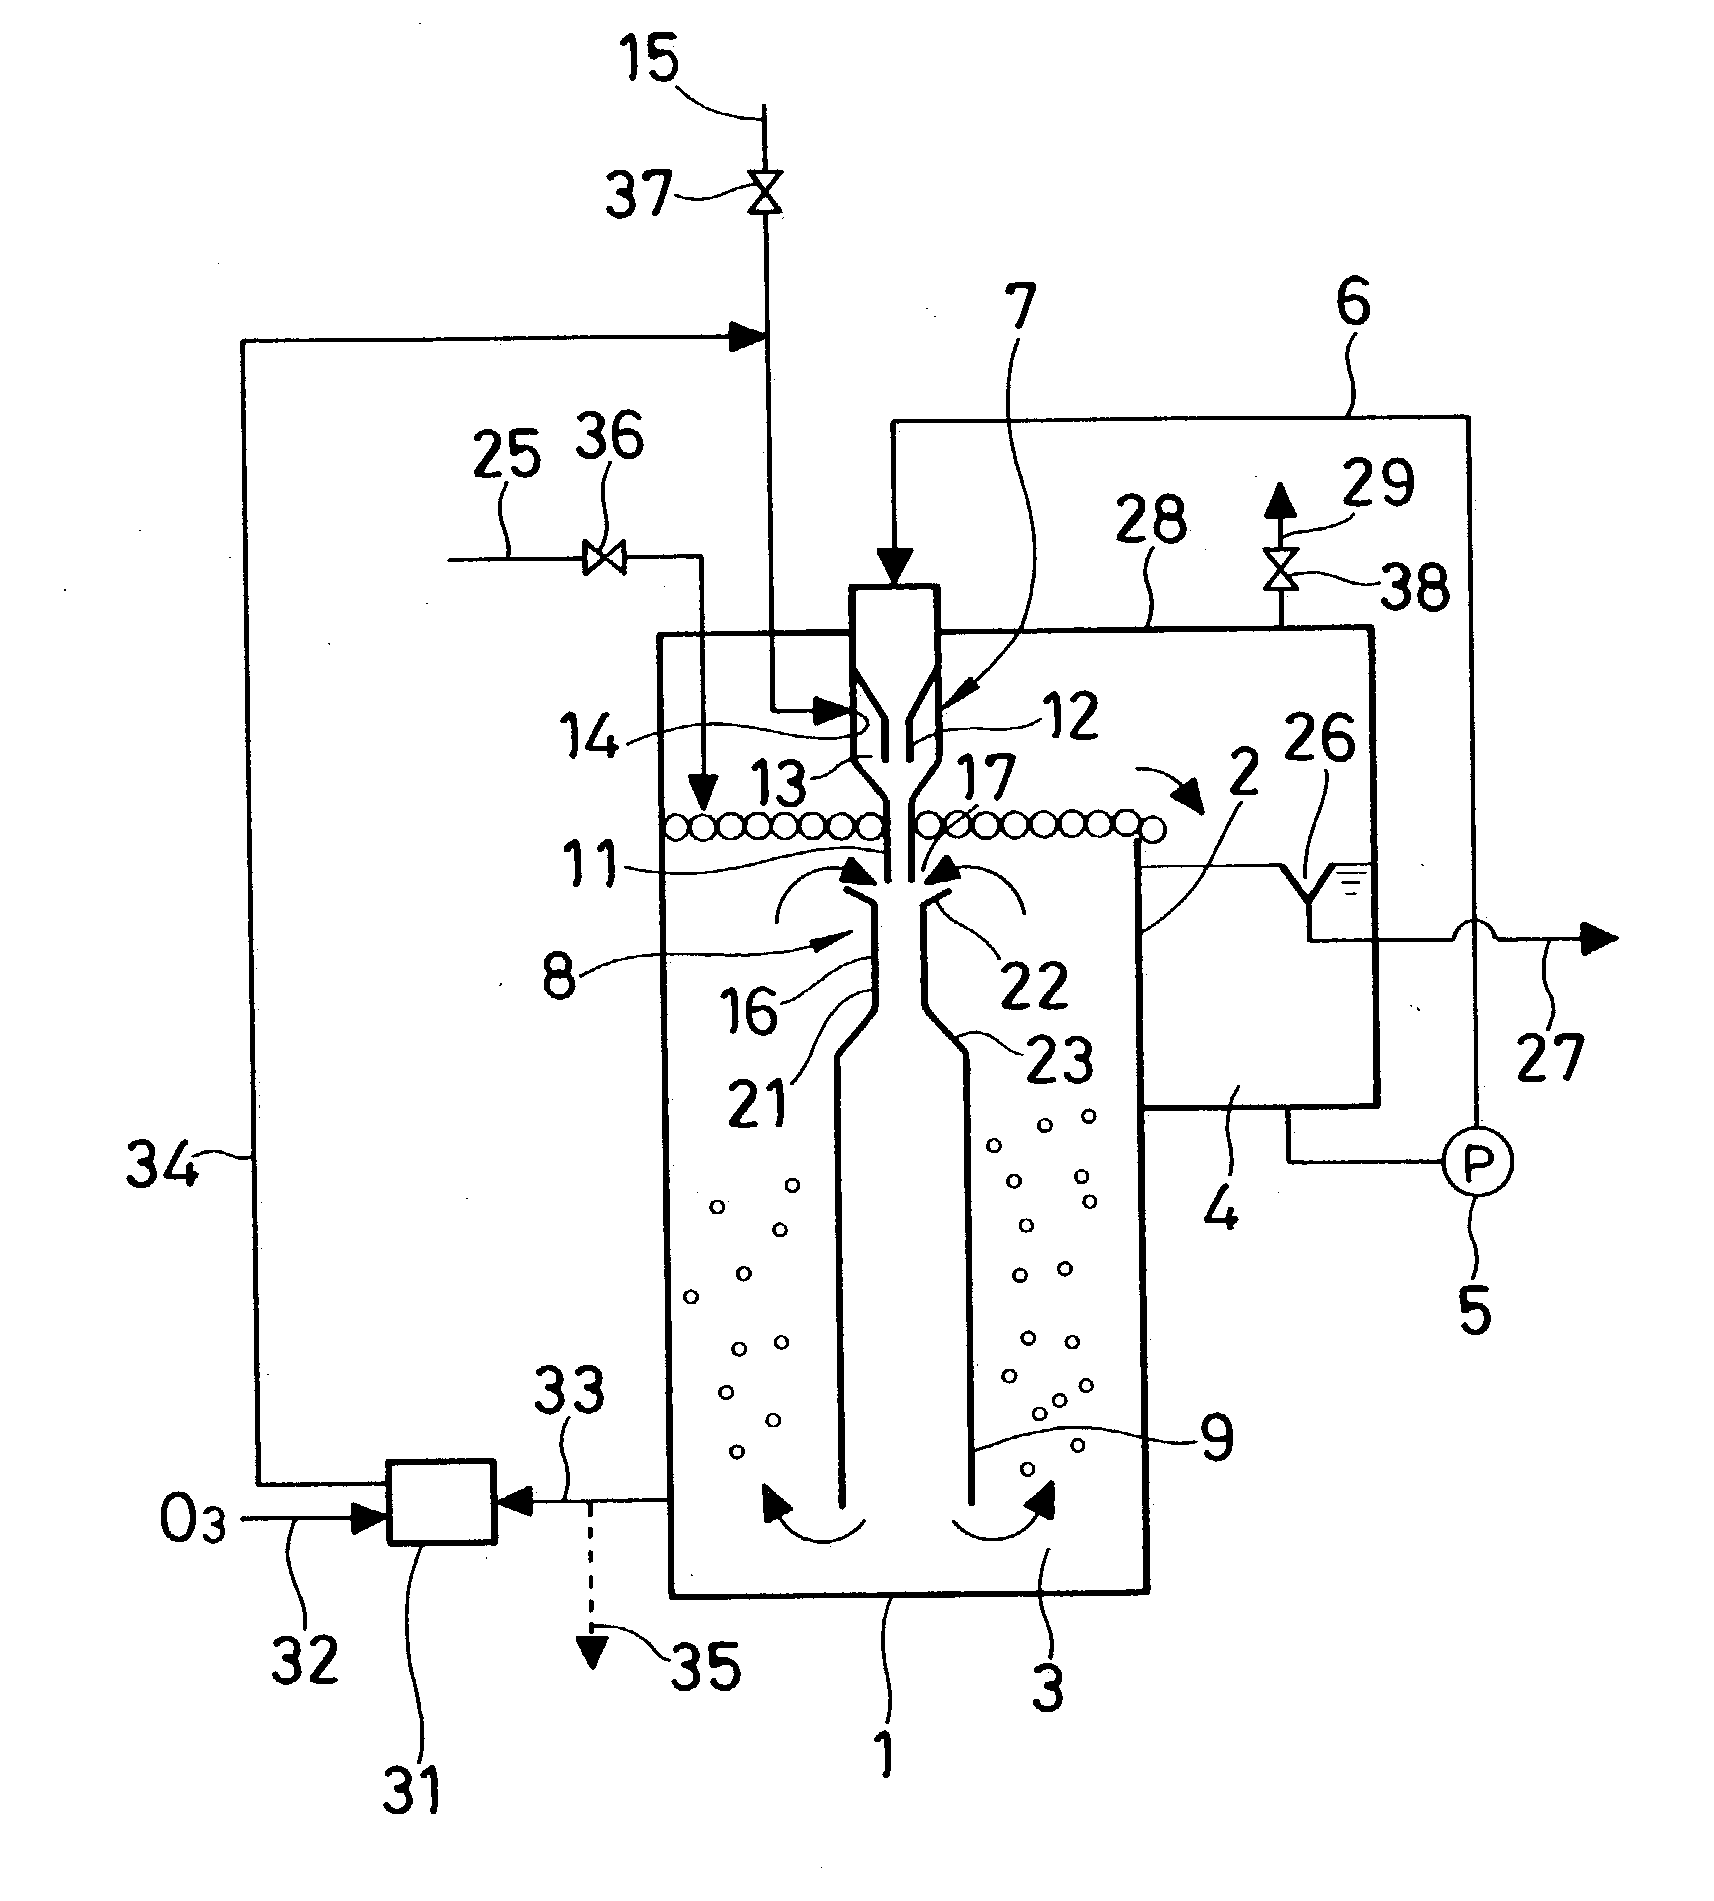 Apparatus and process for aerobic digestion of organic sludge